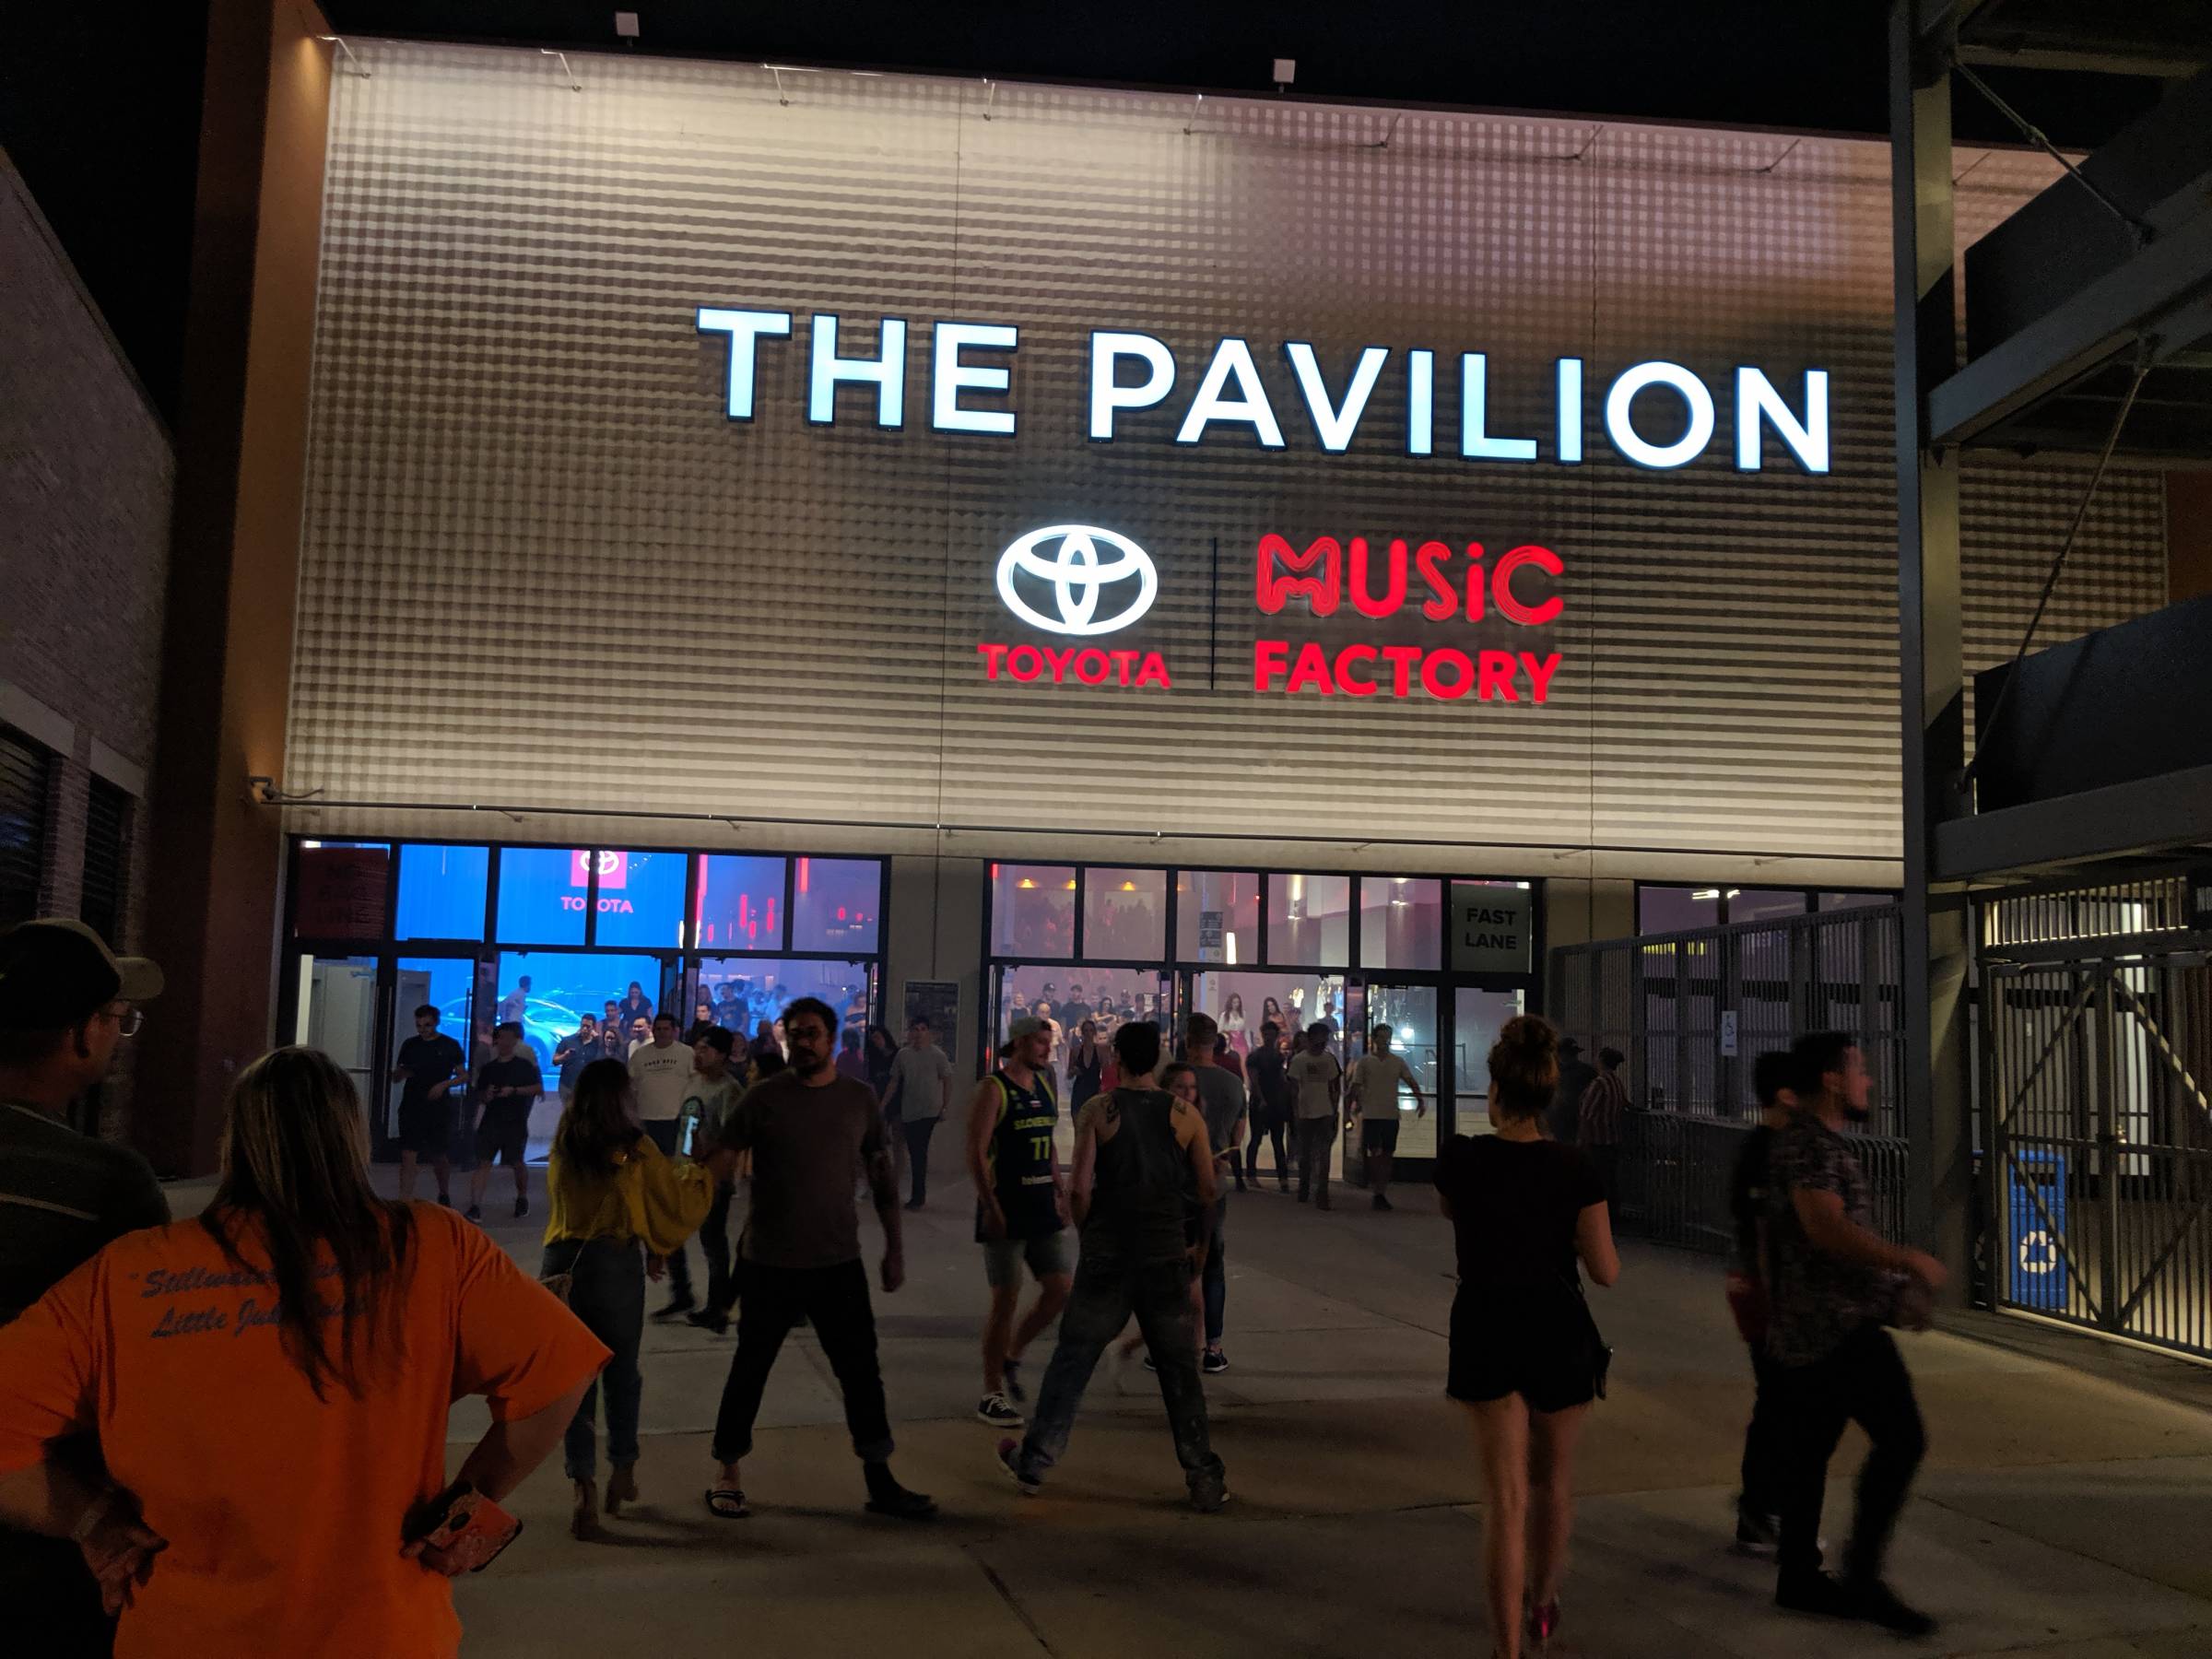 outside the pavilion at toyota music factory